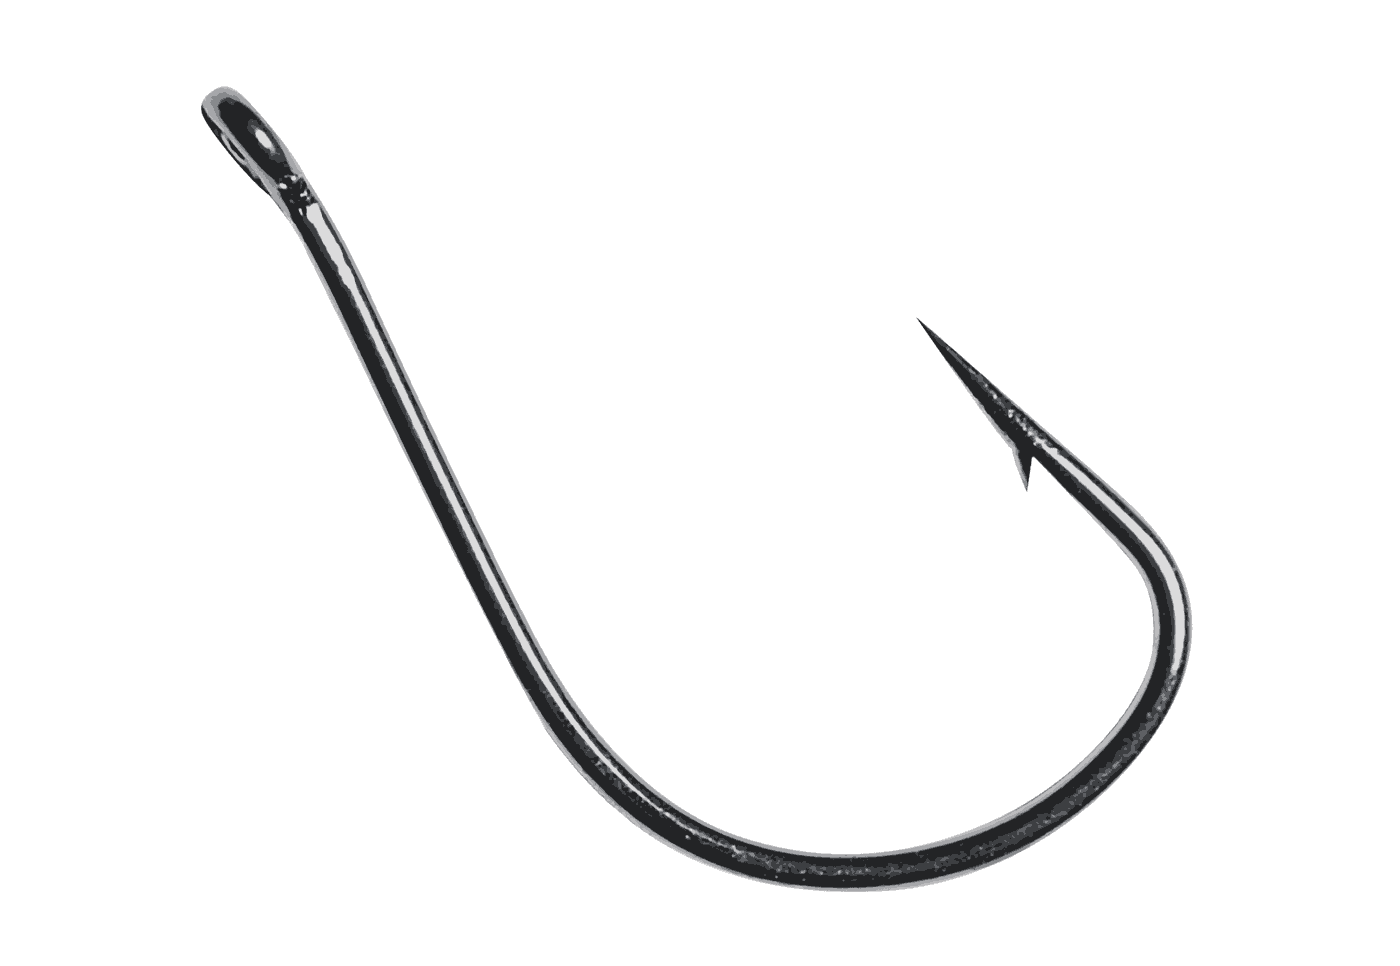 OWNER HOOKS SSW ALL PURPOSE BAIT 5311-191 SZ 9/0 QTY 17 SALTWATER BIG GAME FISH 